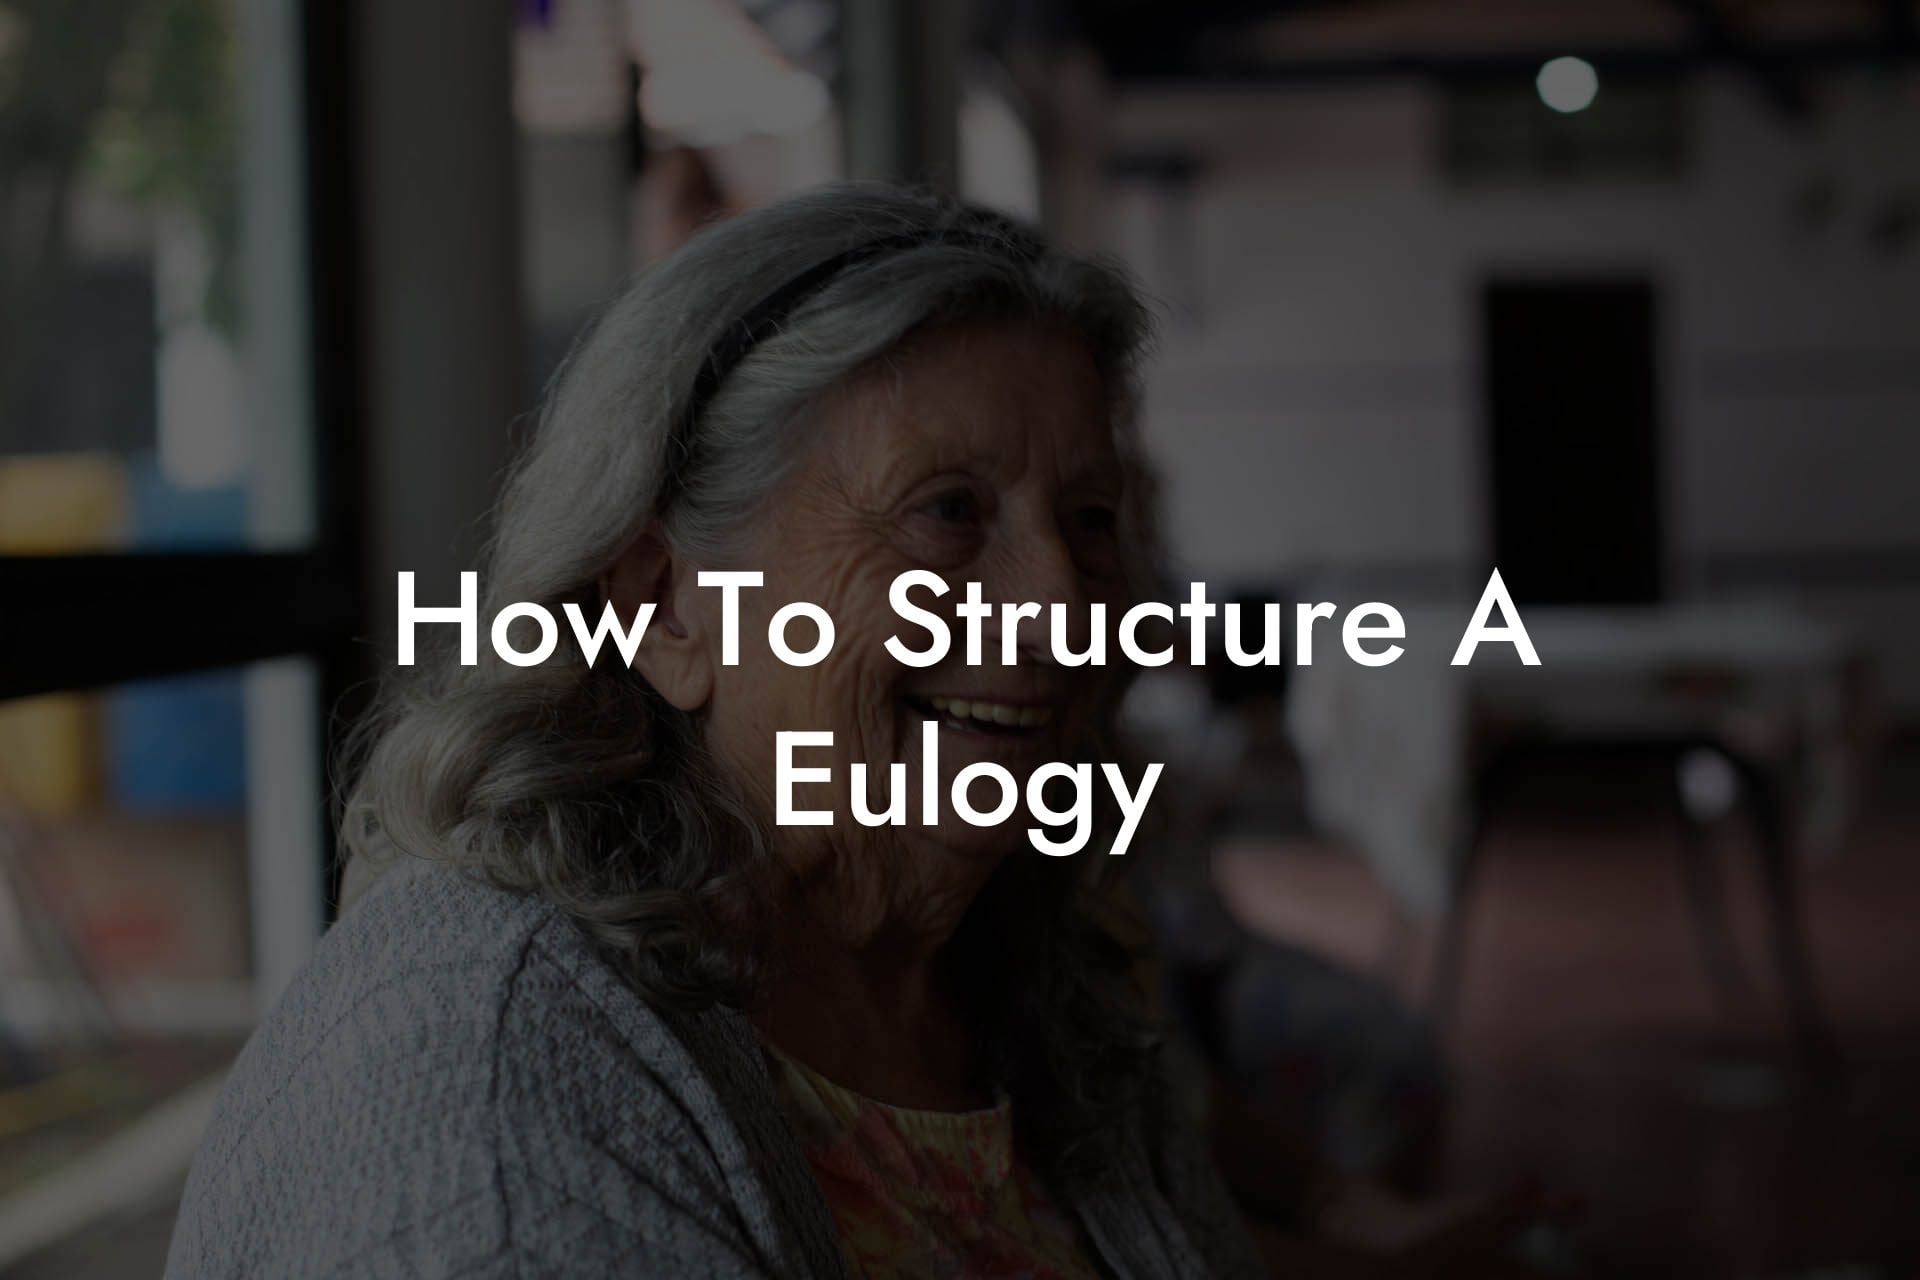 How To Structure A Eulogy